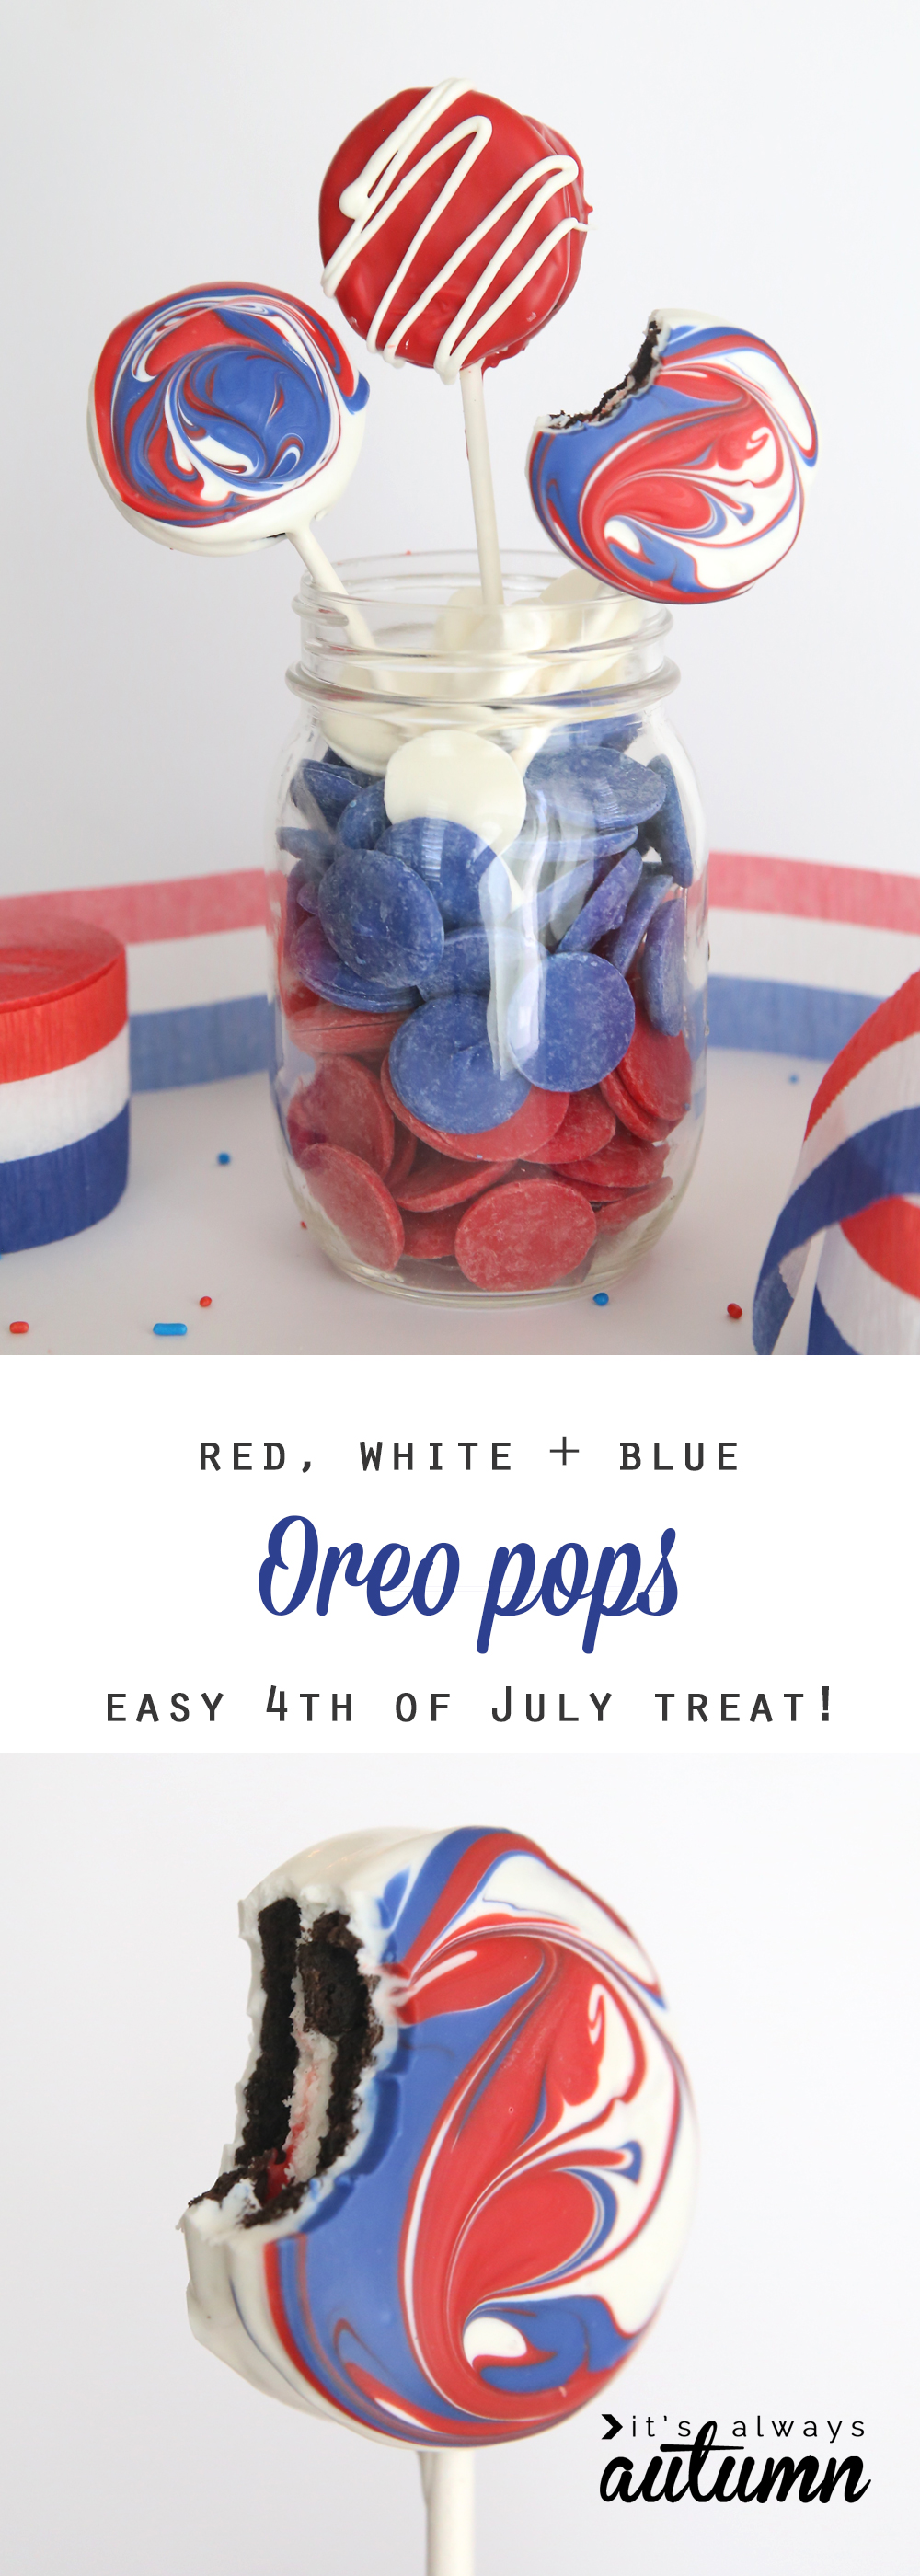 Red white and blue Oreo pops for the 4th of July